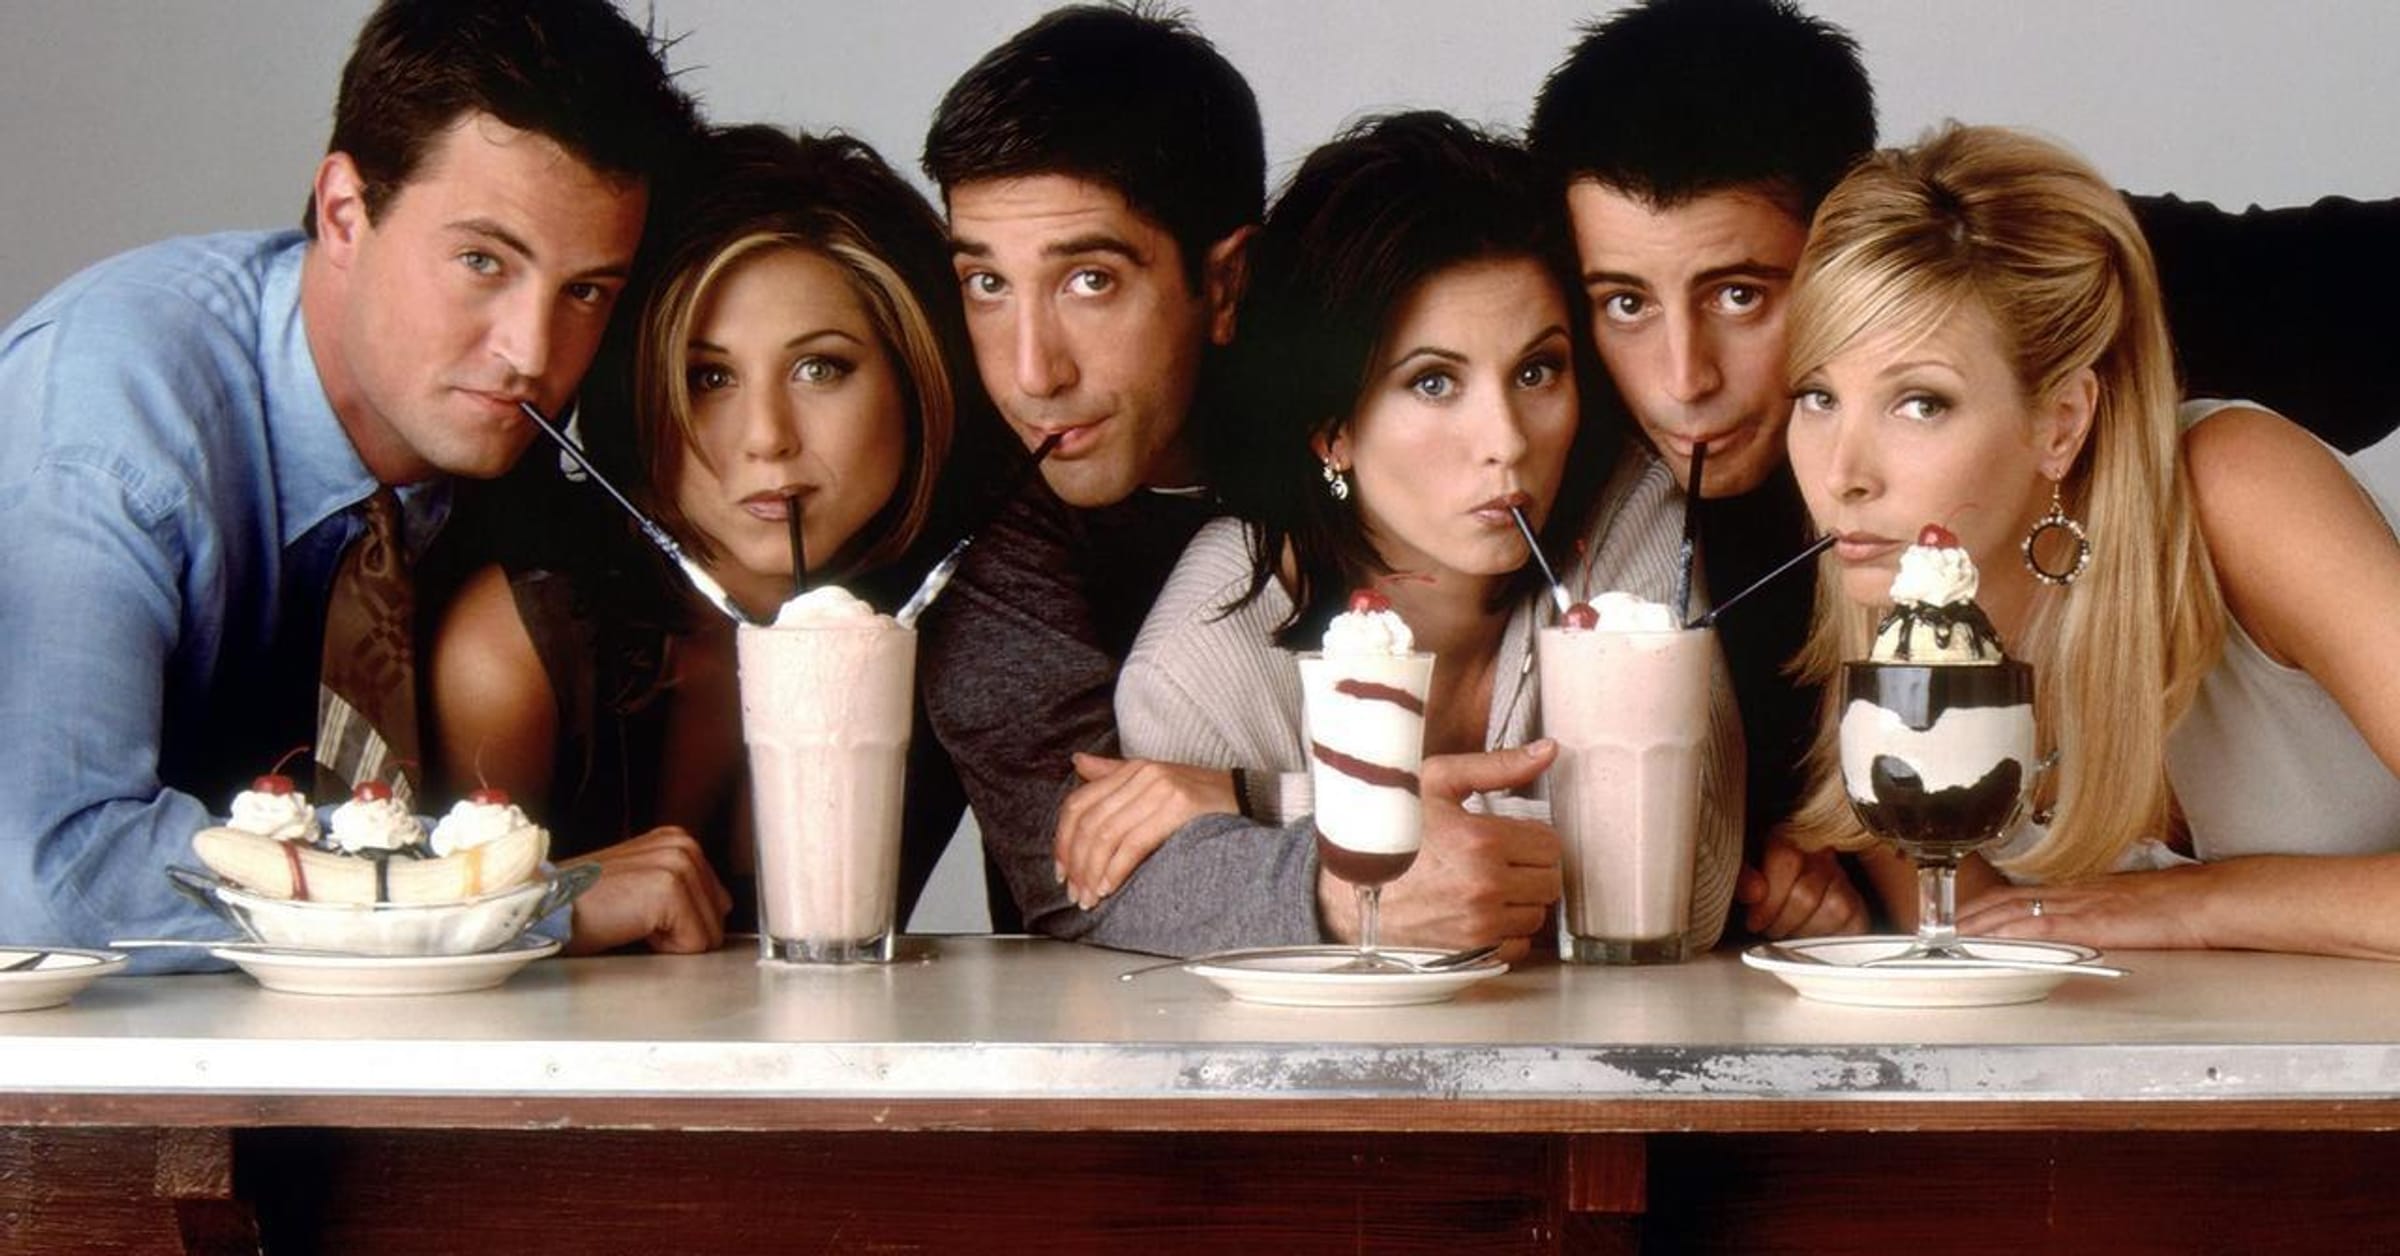 Friends (TV series): Which are your favorite scenes involving Ross